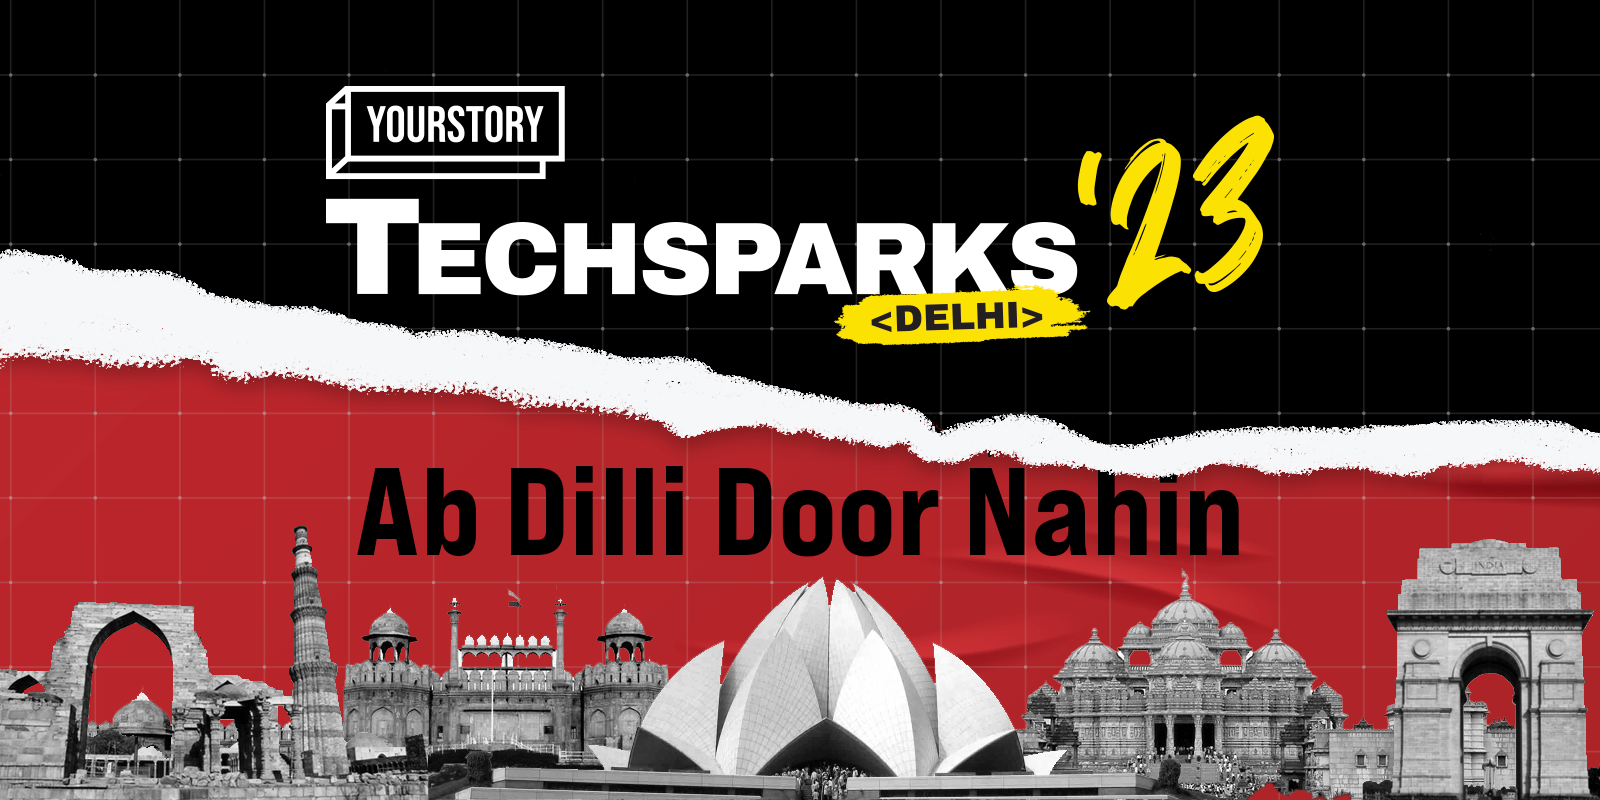 Ab Dilli Door Nahin. YourStory brings TechSparks to Delhi 